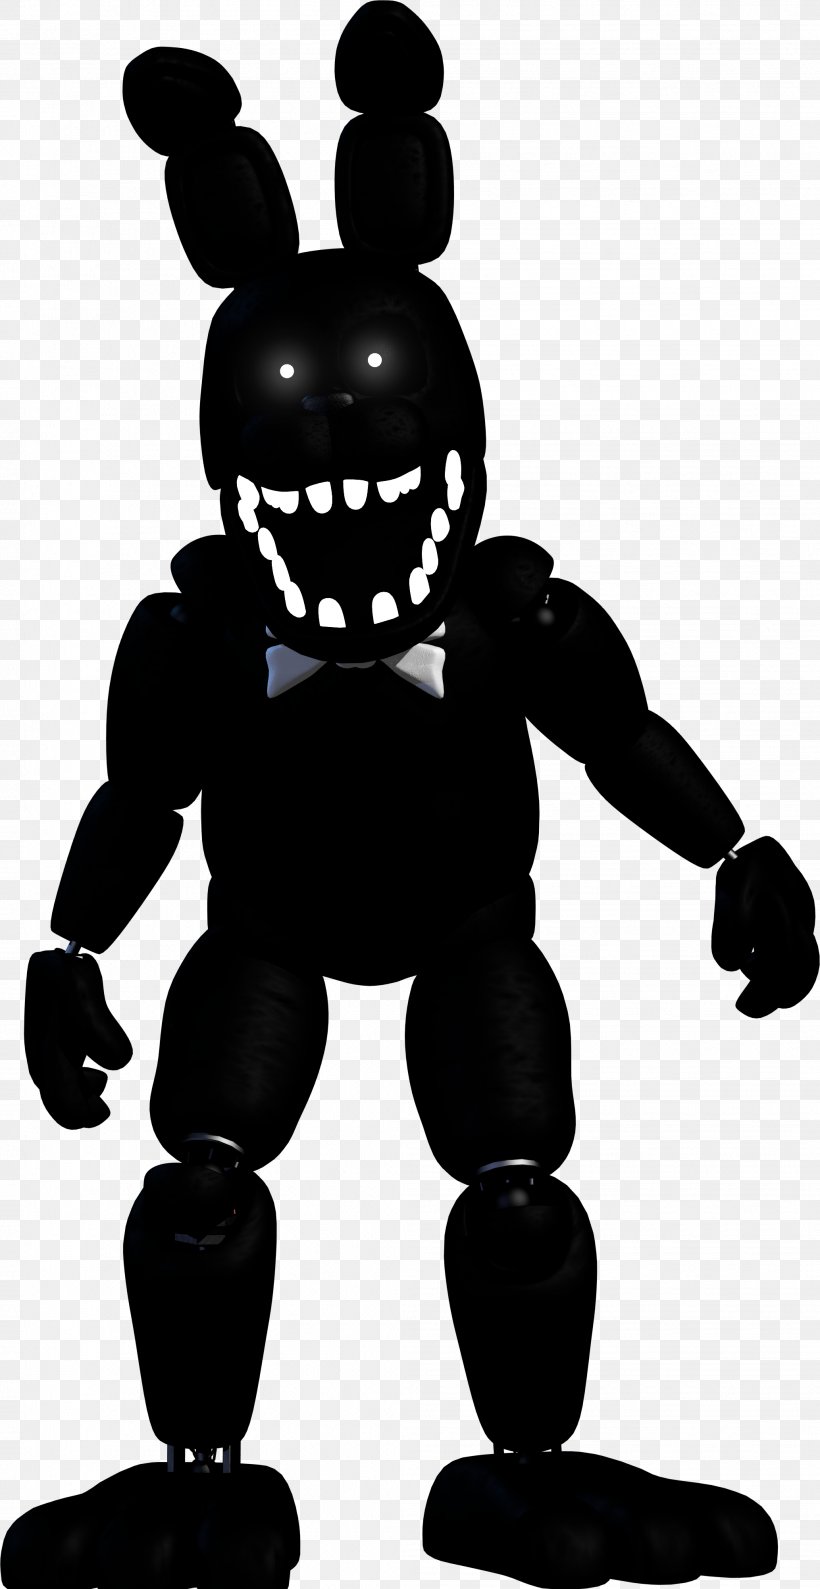 Five Nights At Freddy's DeviantArt Silhouette Clip Art, PNG, 2066x4004px, Five Nights At Freddy S, Black, Black And White, Deviantart, Fictional Character Download Free